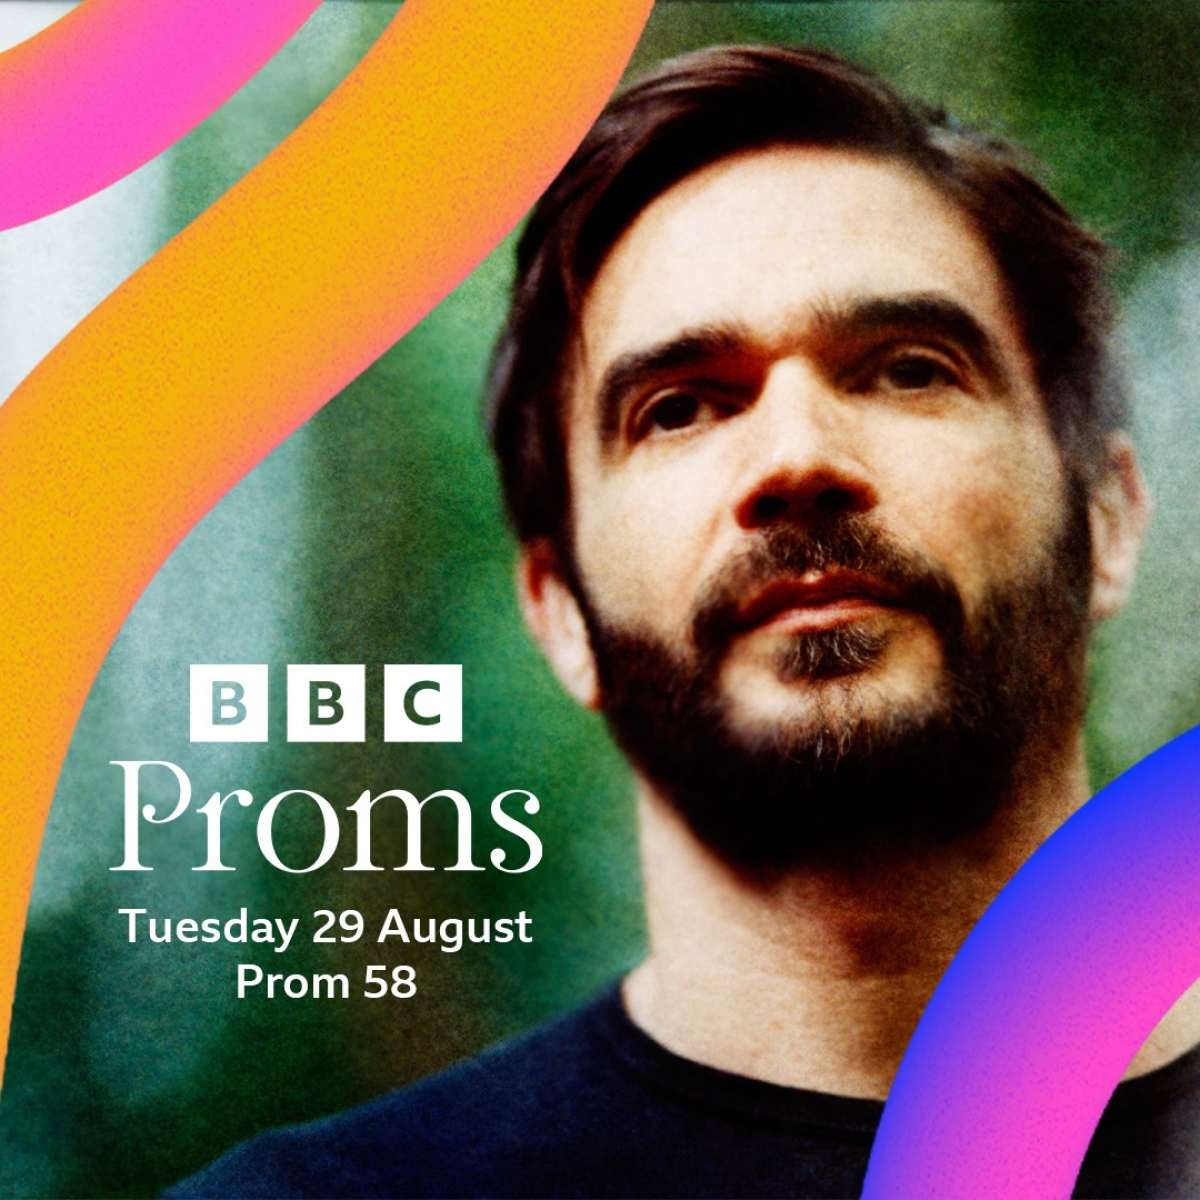 Announcing BBC Proms performance at Royal Albert Hall, August 29th